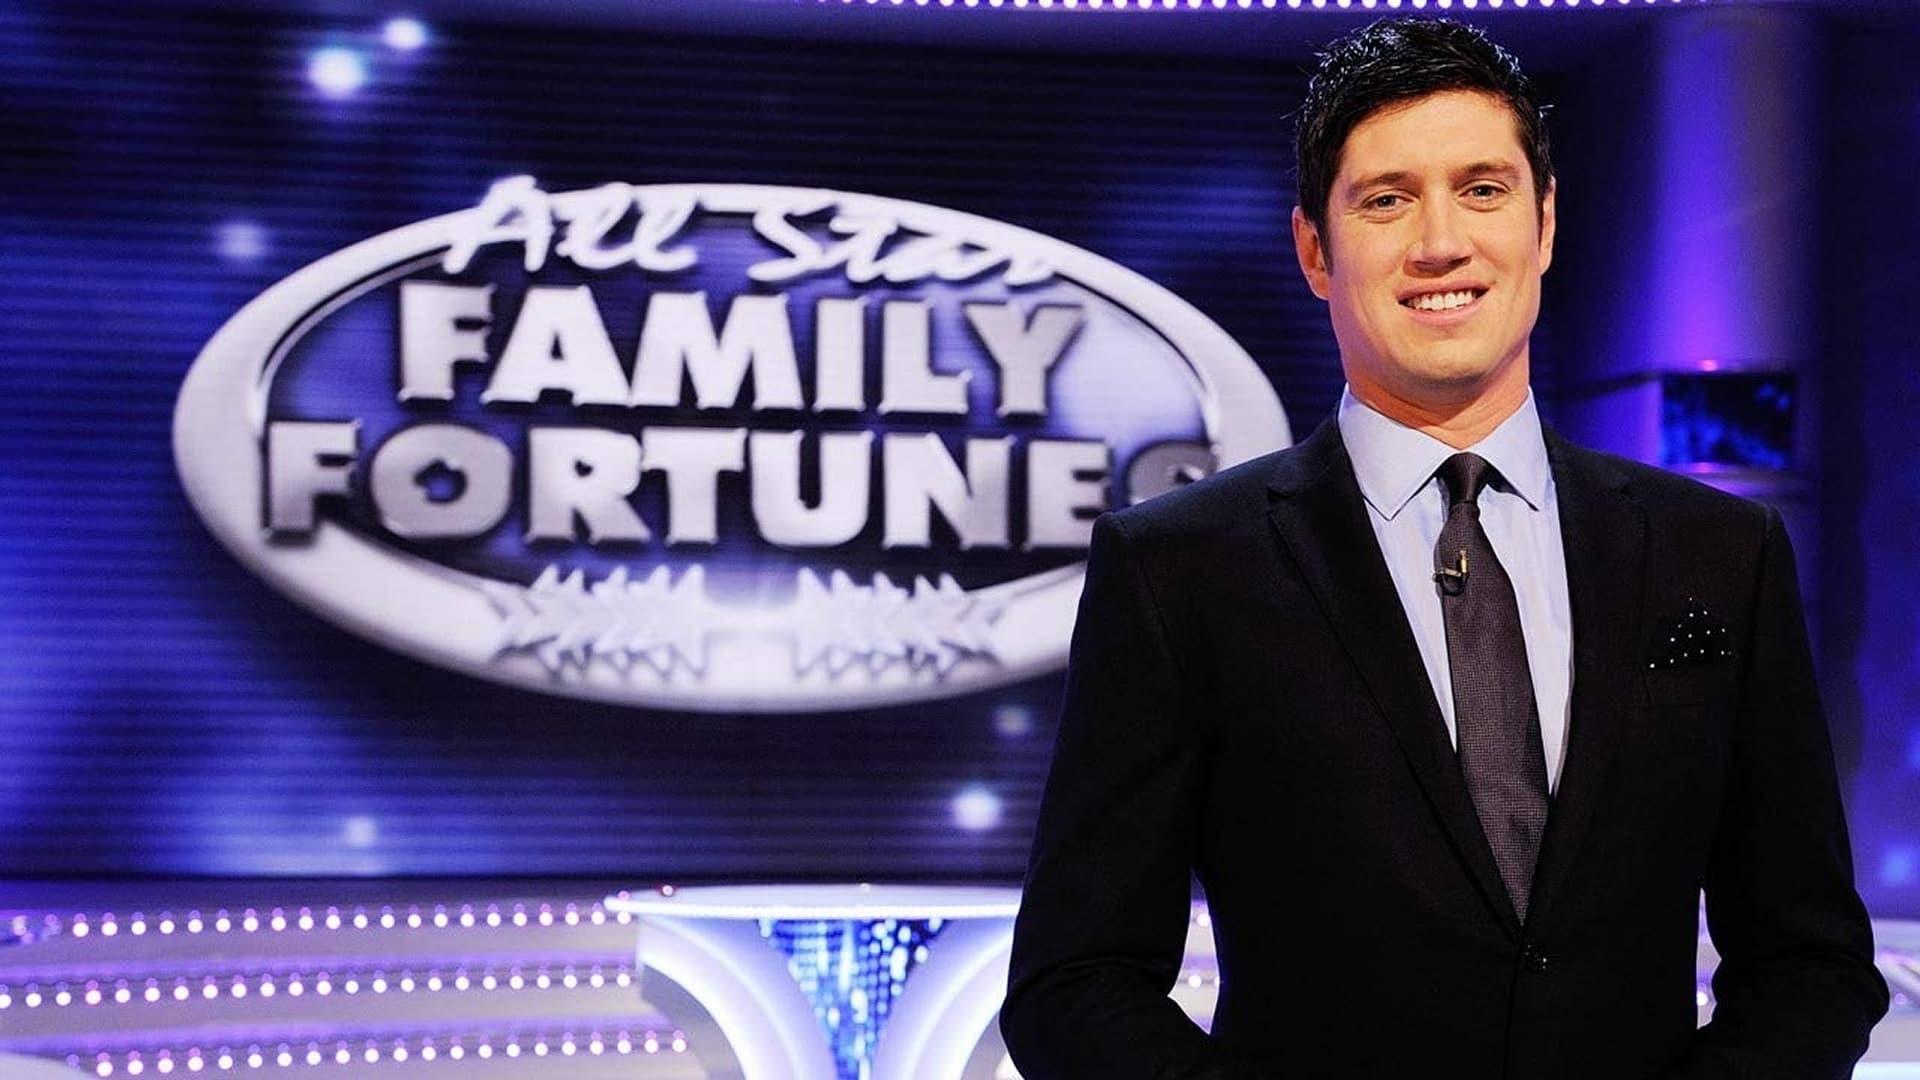 All Star Family Fortunes backdrop